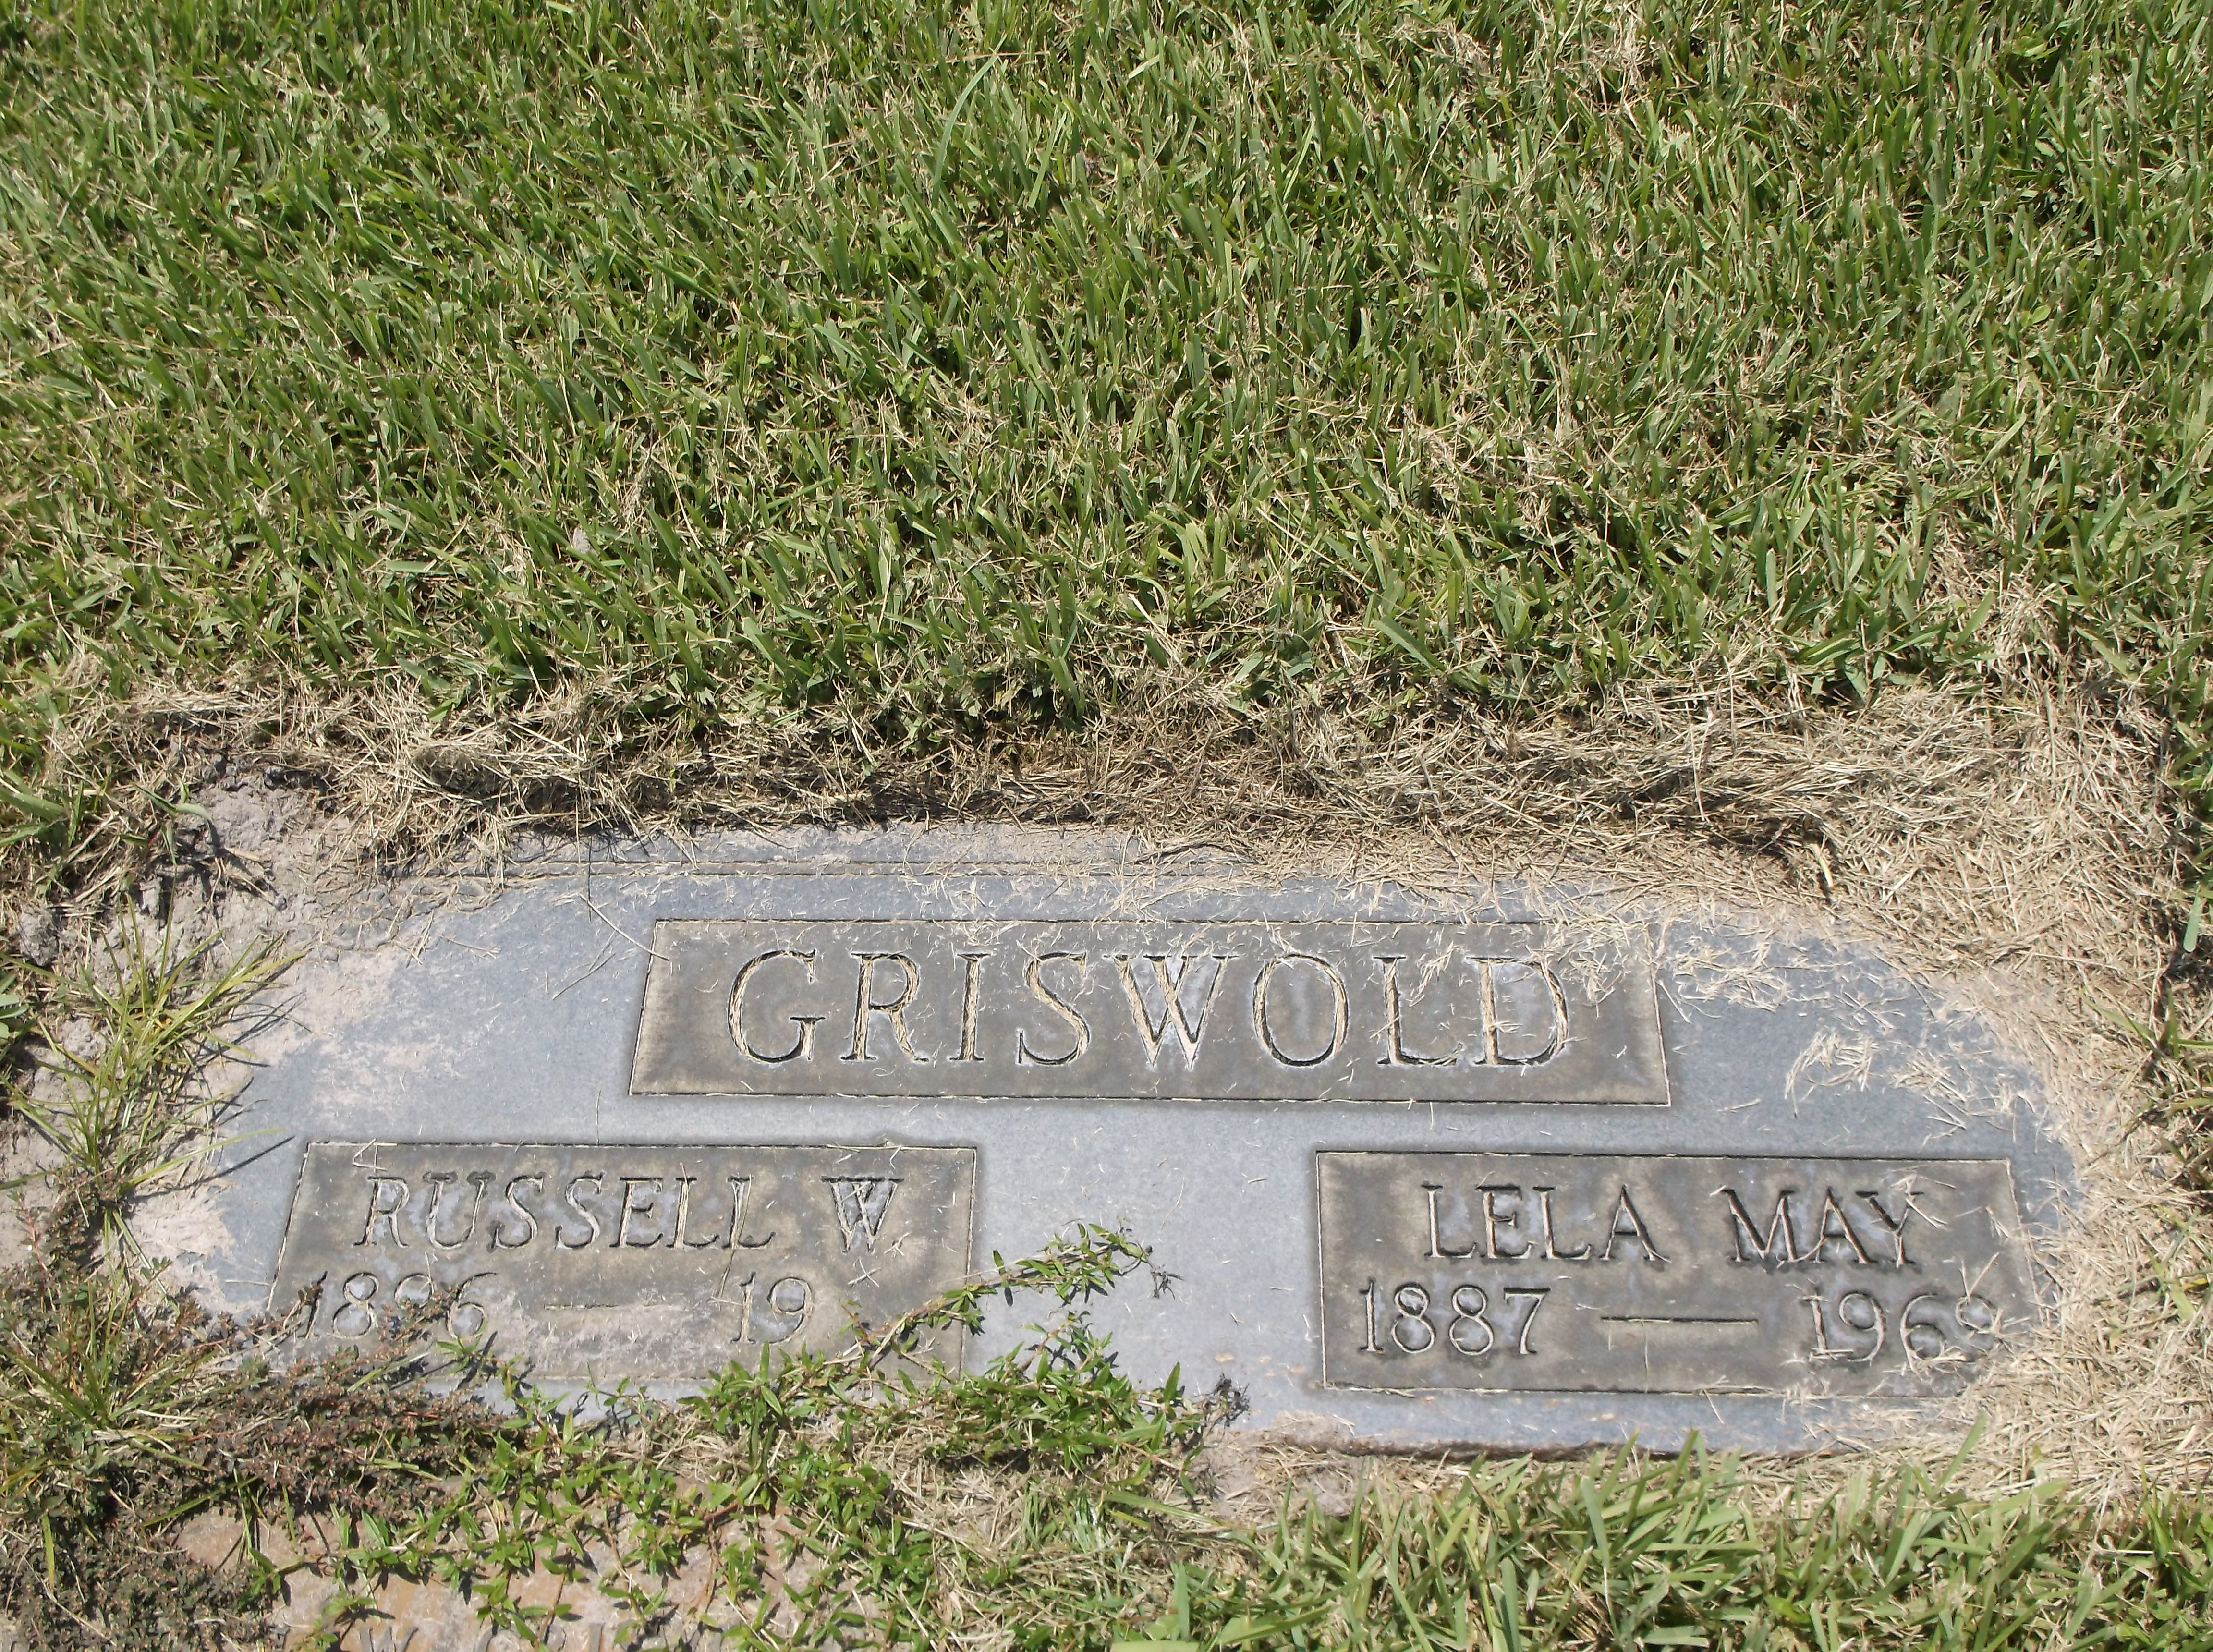 Lela May Griswold